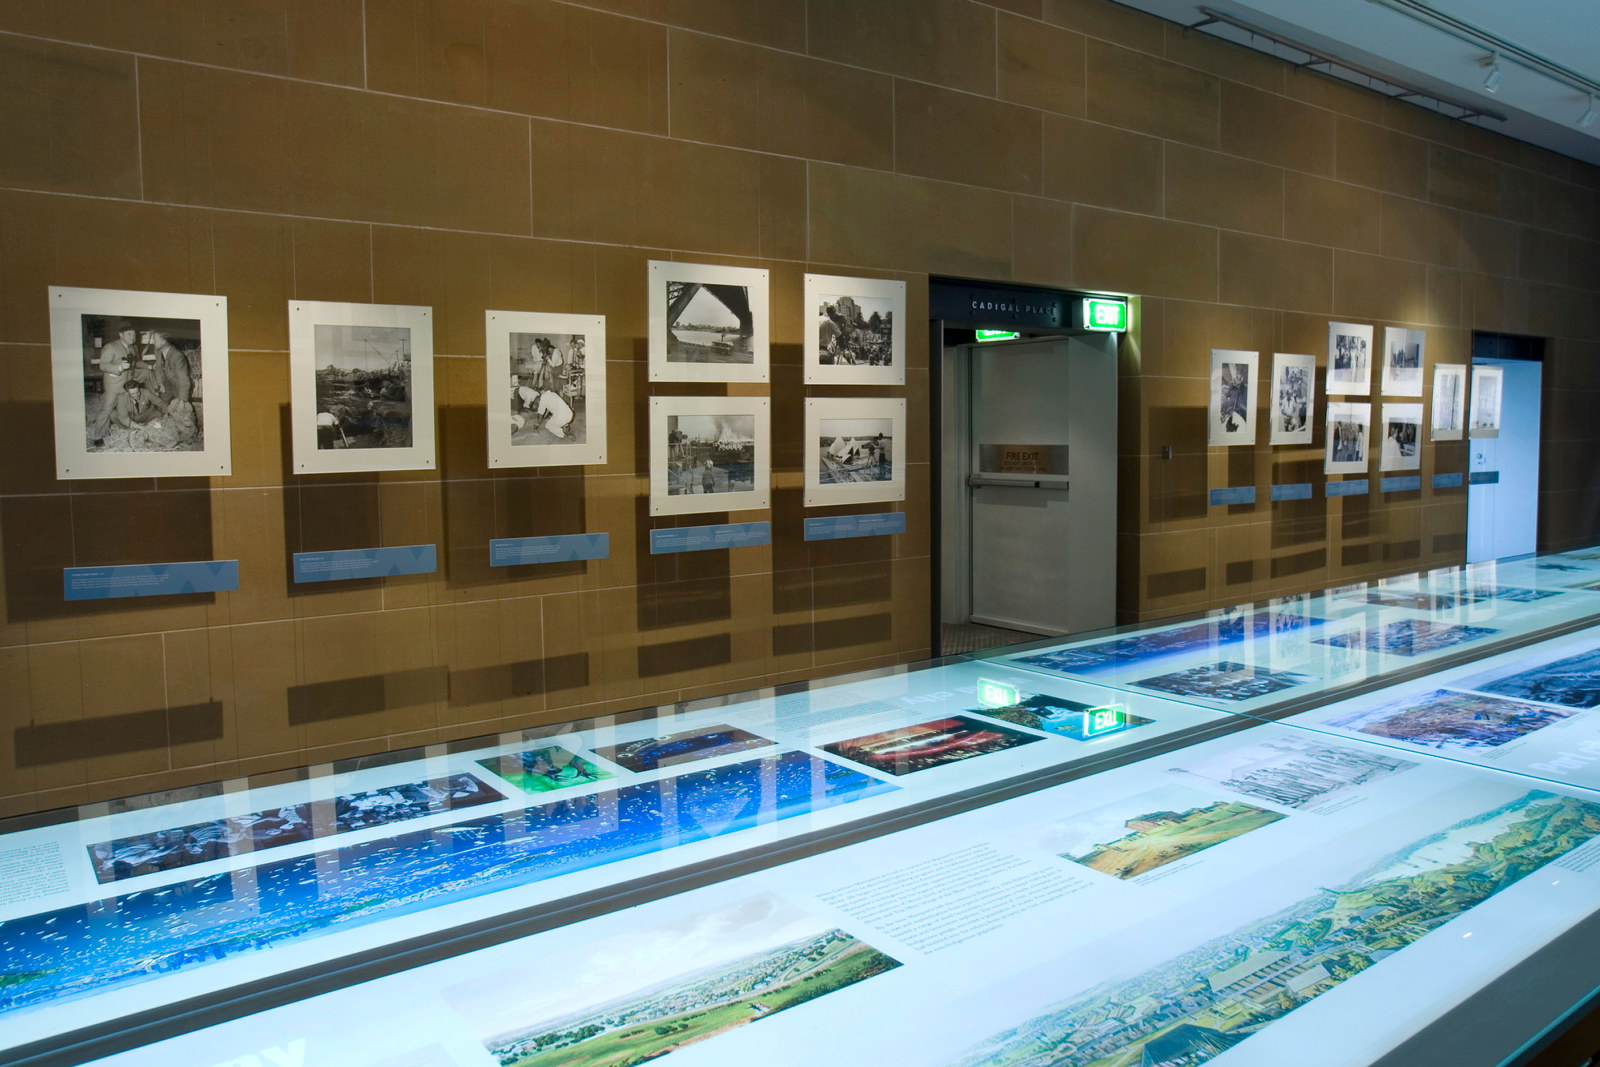 Broadcasting in Sydney: images from ABC archives installation view